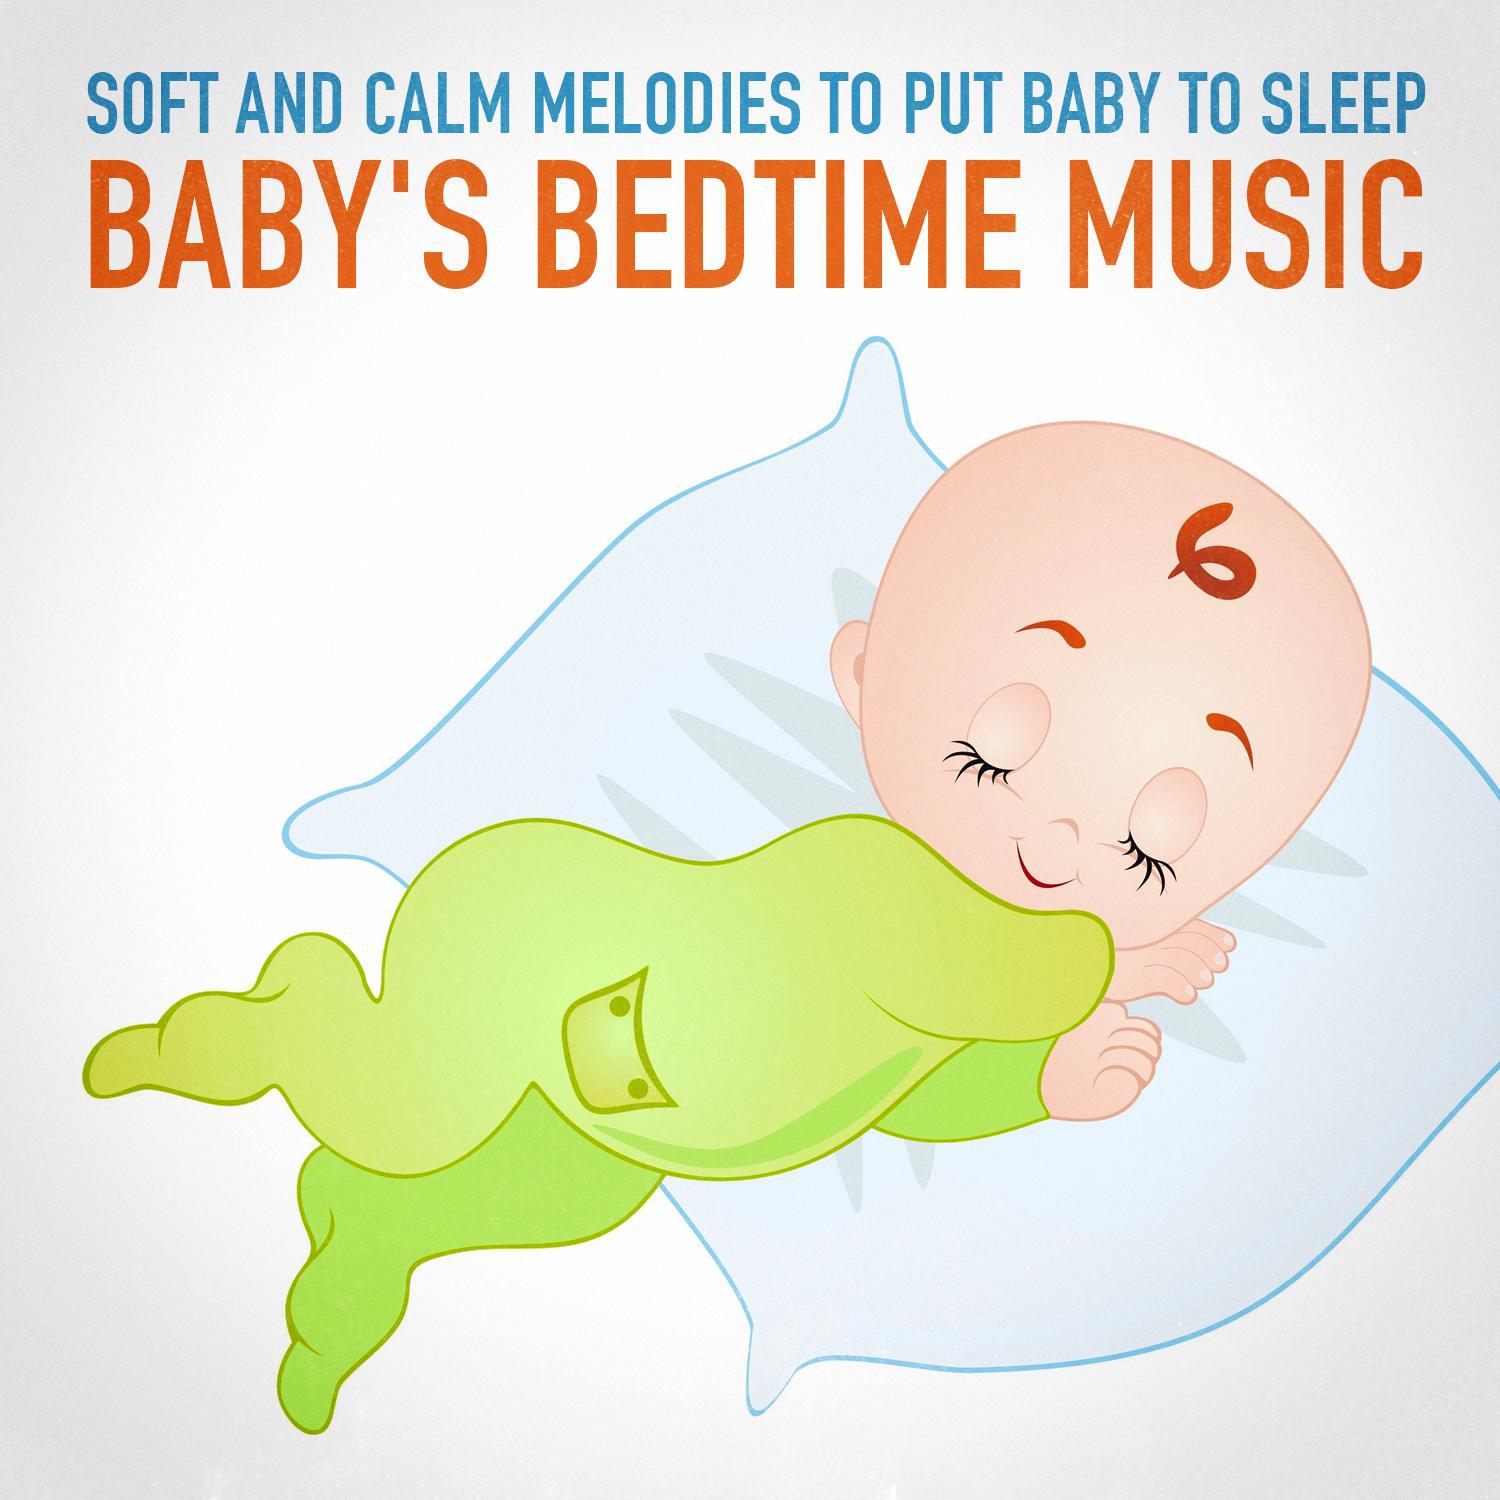 Baby's Bedtime Music (Soft and Calm Melodies to Put Baby to Sleep)